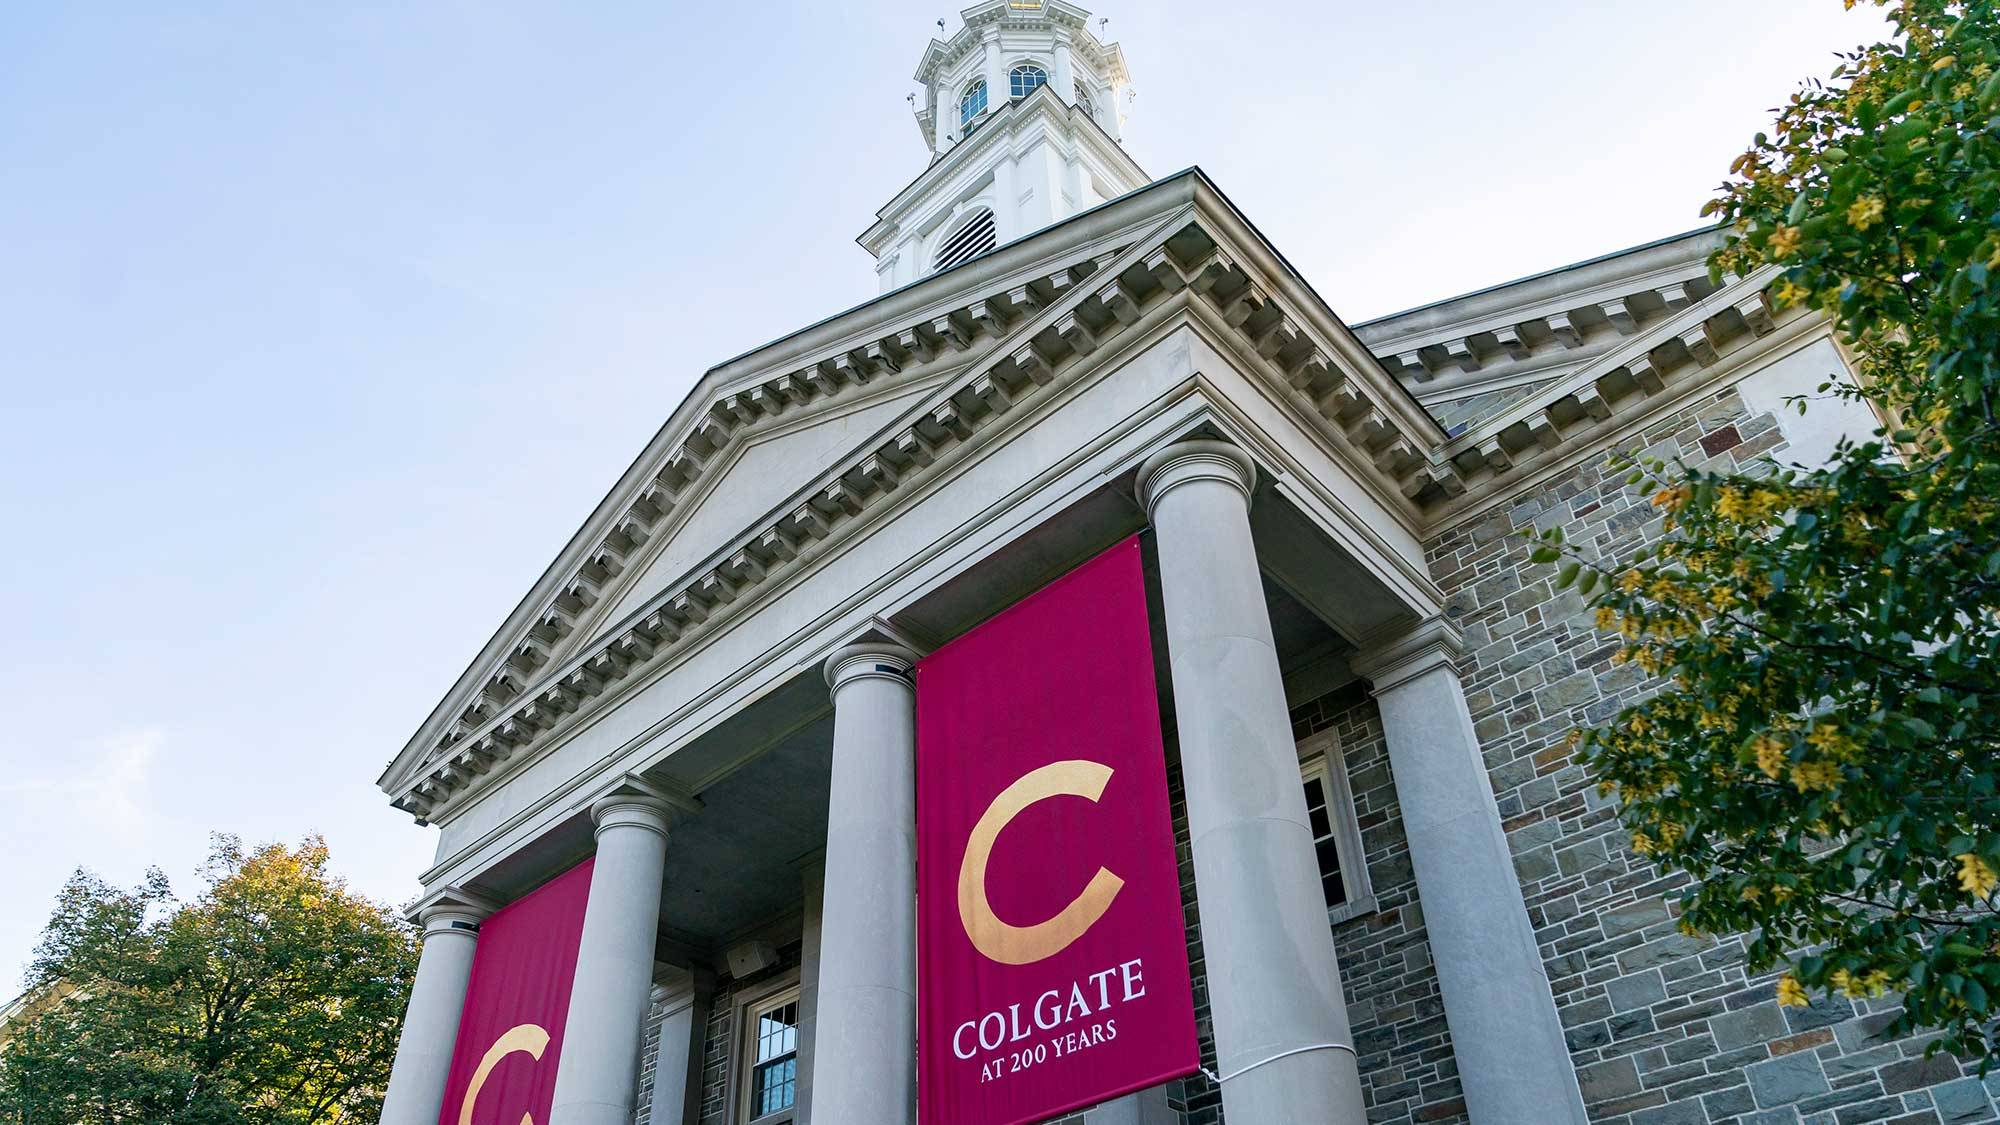 Memorial Chapel with "Colgate at 200" banners hanging from the columns